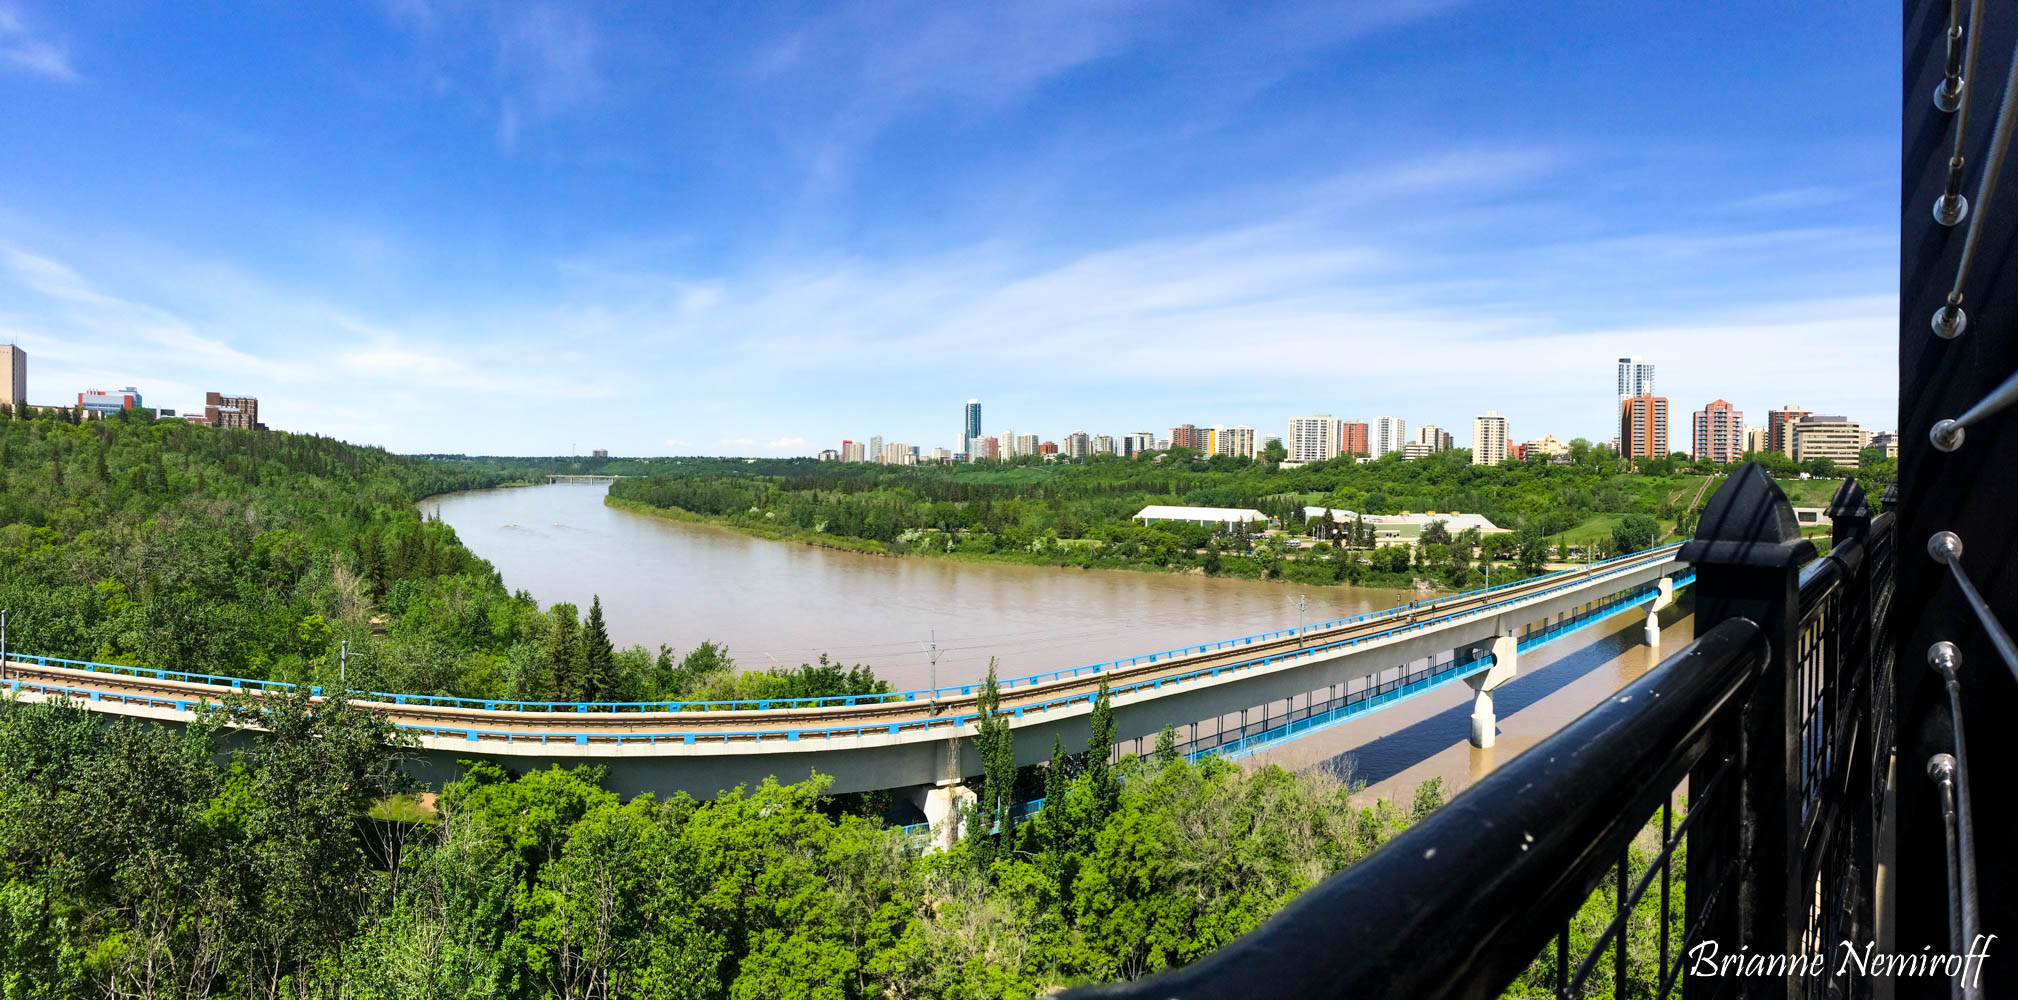 A view of River Valley Victoria and Oliver neighborhood in Edmonton from Dudley B Menzies Bridge